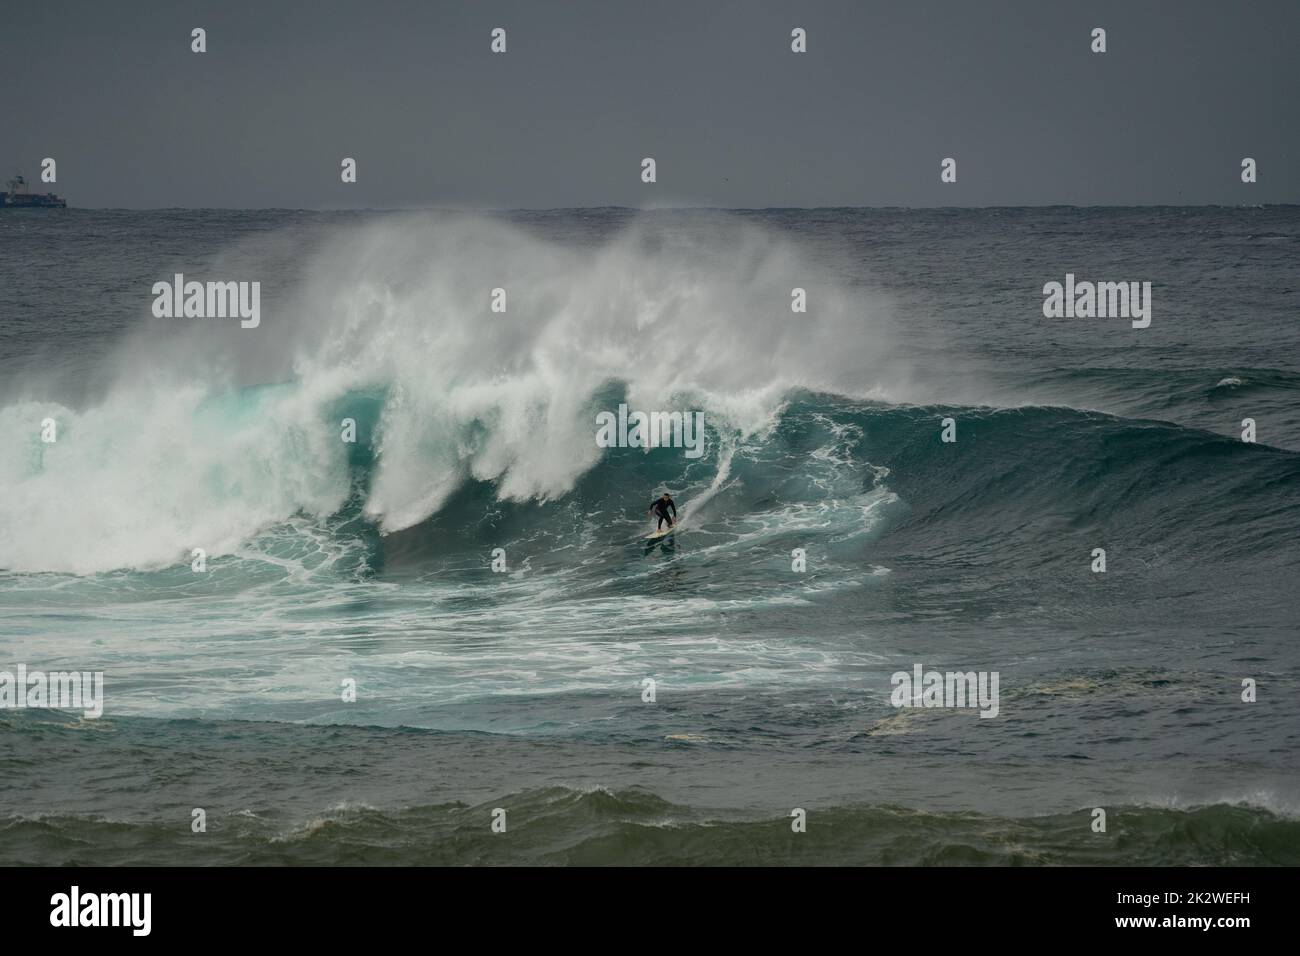 A closeup shot of a surfer surfing on a large wave at Wedding Cake Island, Sydney Stock Photo